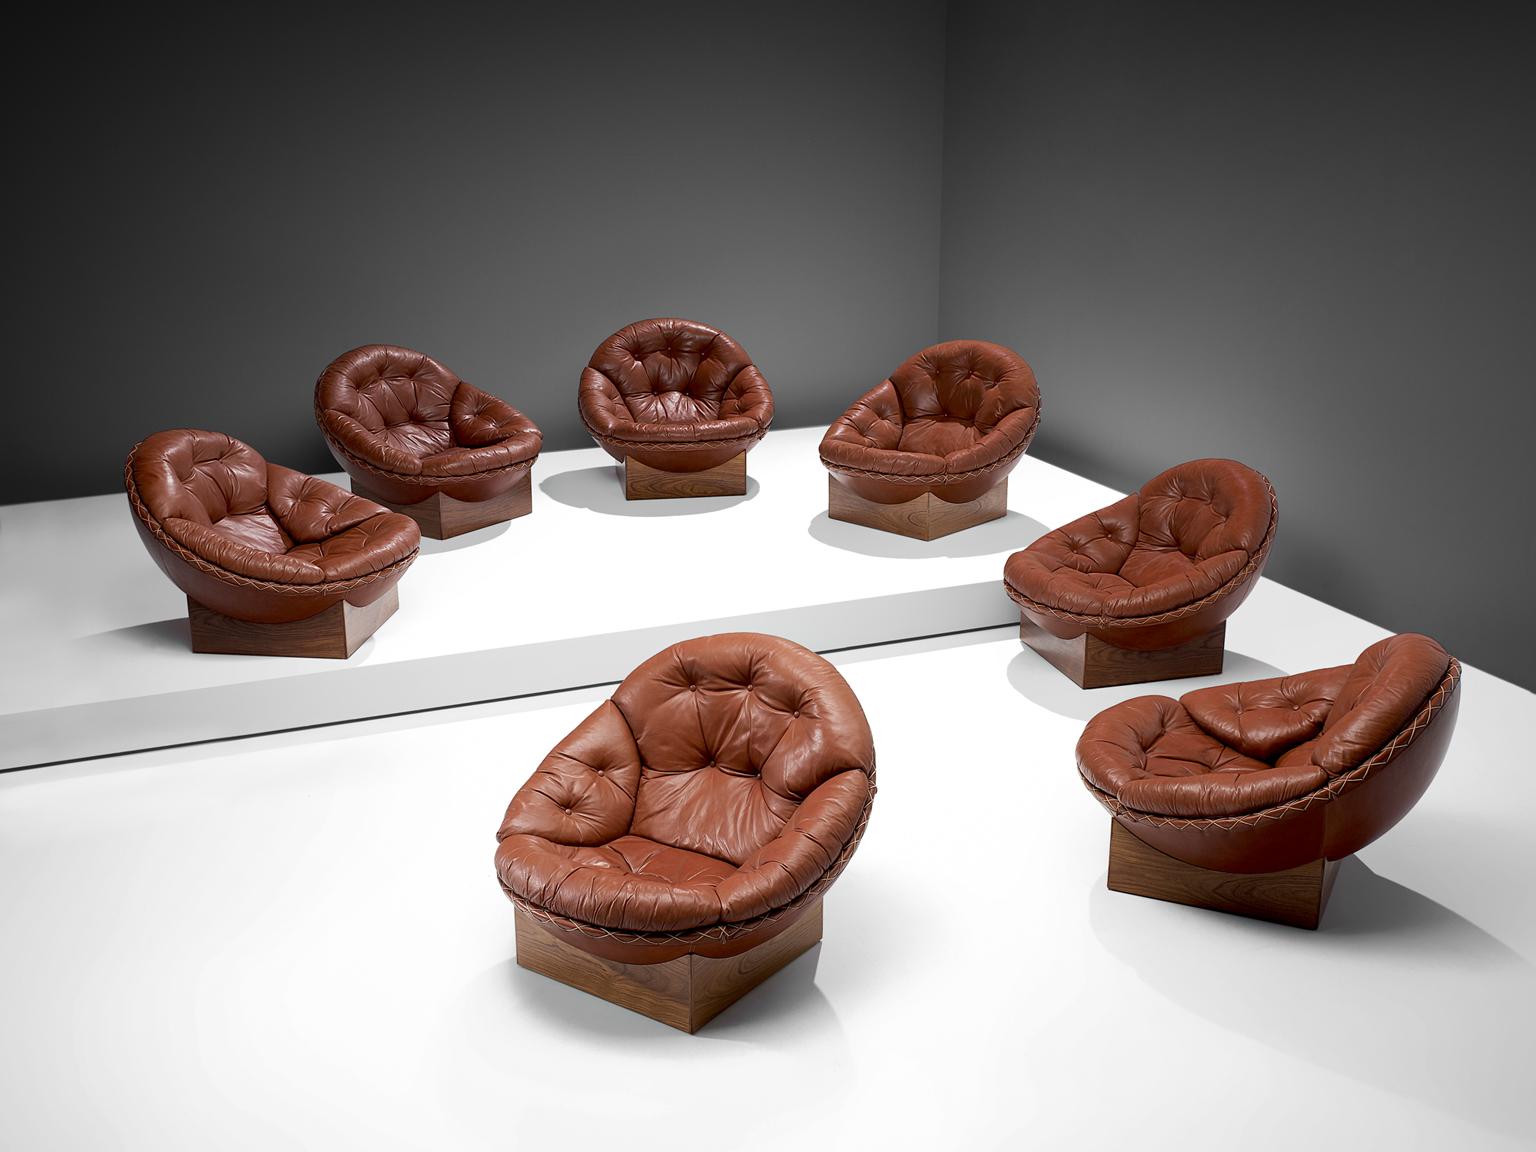 Illum Wikkelsø for Ryesberg Møbler, large set of lounge chairs, red leather, rosewood, Denmark, 1960s. 

This is a rare set of seven bowl chairs by Illum Wikkelsø for Ryesberg Møbler. The chairs are still covered in their original leather, which